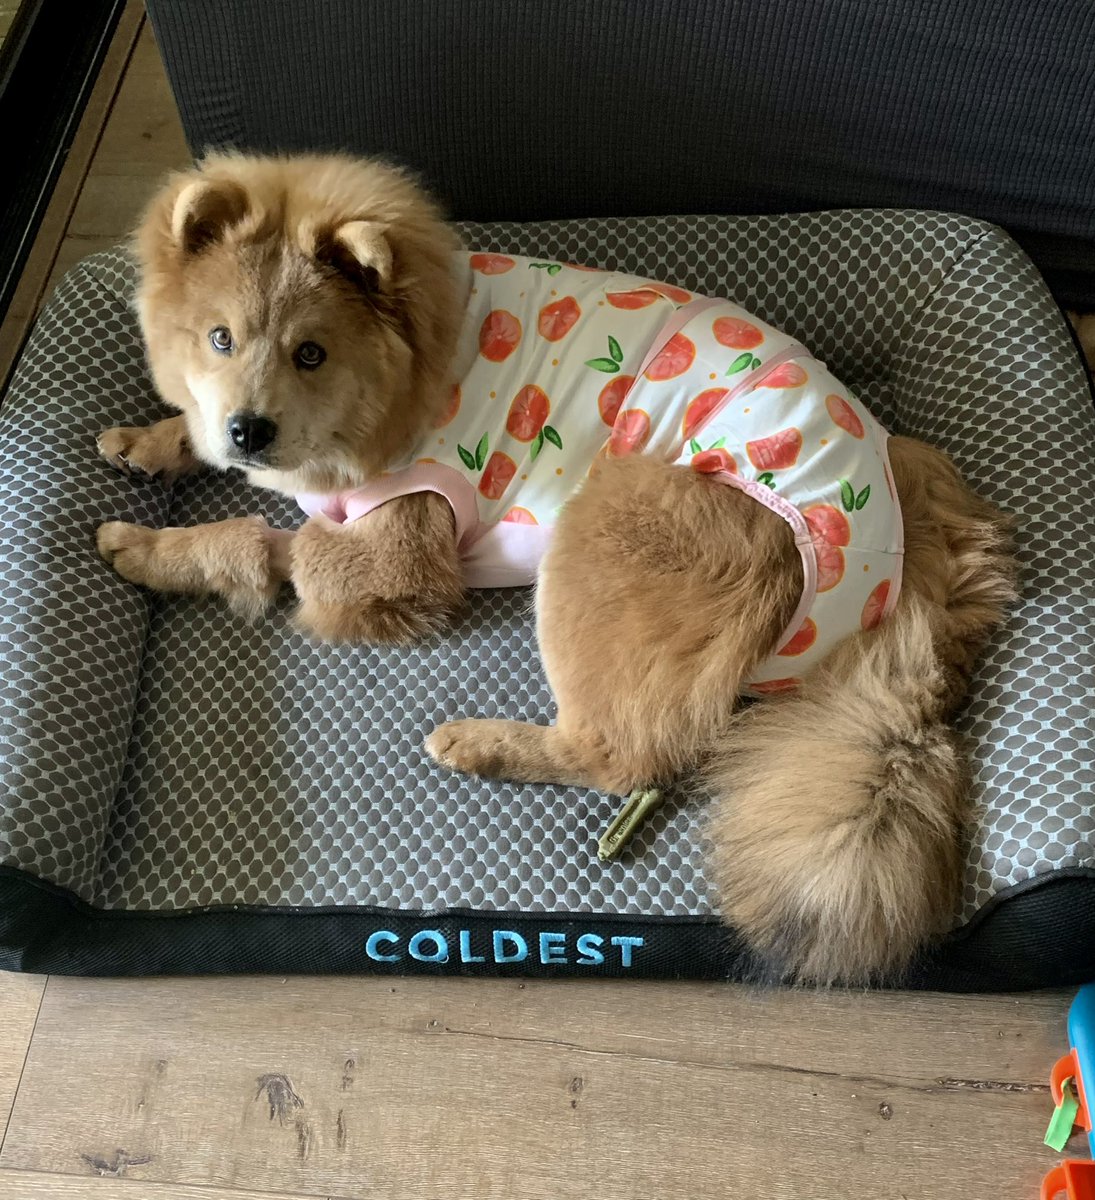 When you opt for the onsie instead of the cone of shame. 
.
.
#lovebugsrescue #instadog #dogstagram #chowchow #chowchowsofinstagram #instachow #rescued #love #2024 #spayed #spayday #petstagram #humpday #dogsofinstagram #dogrescue